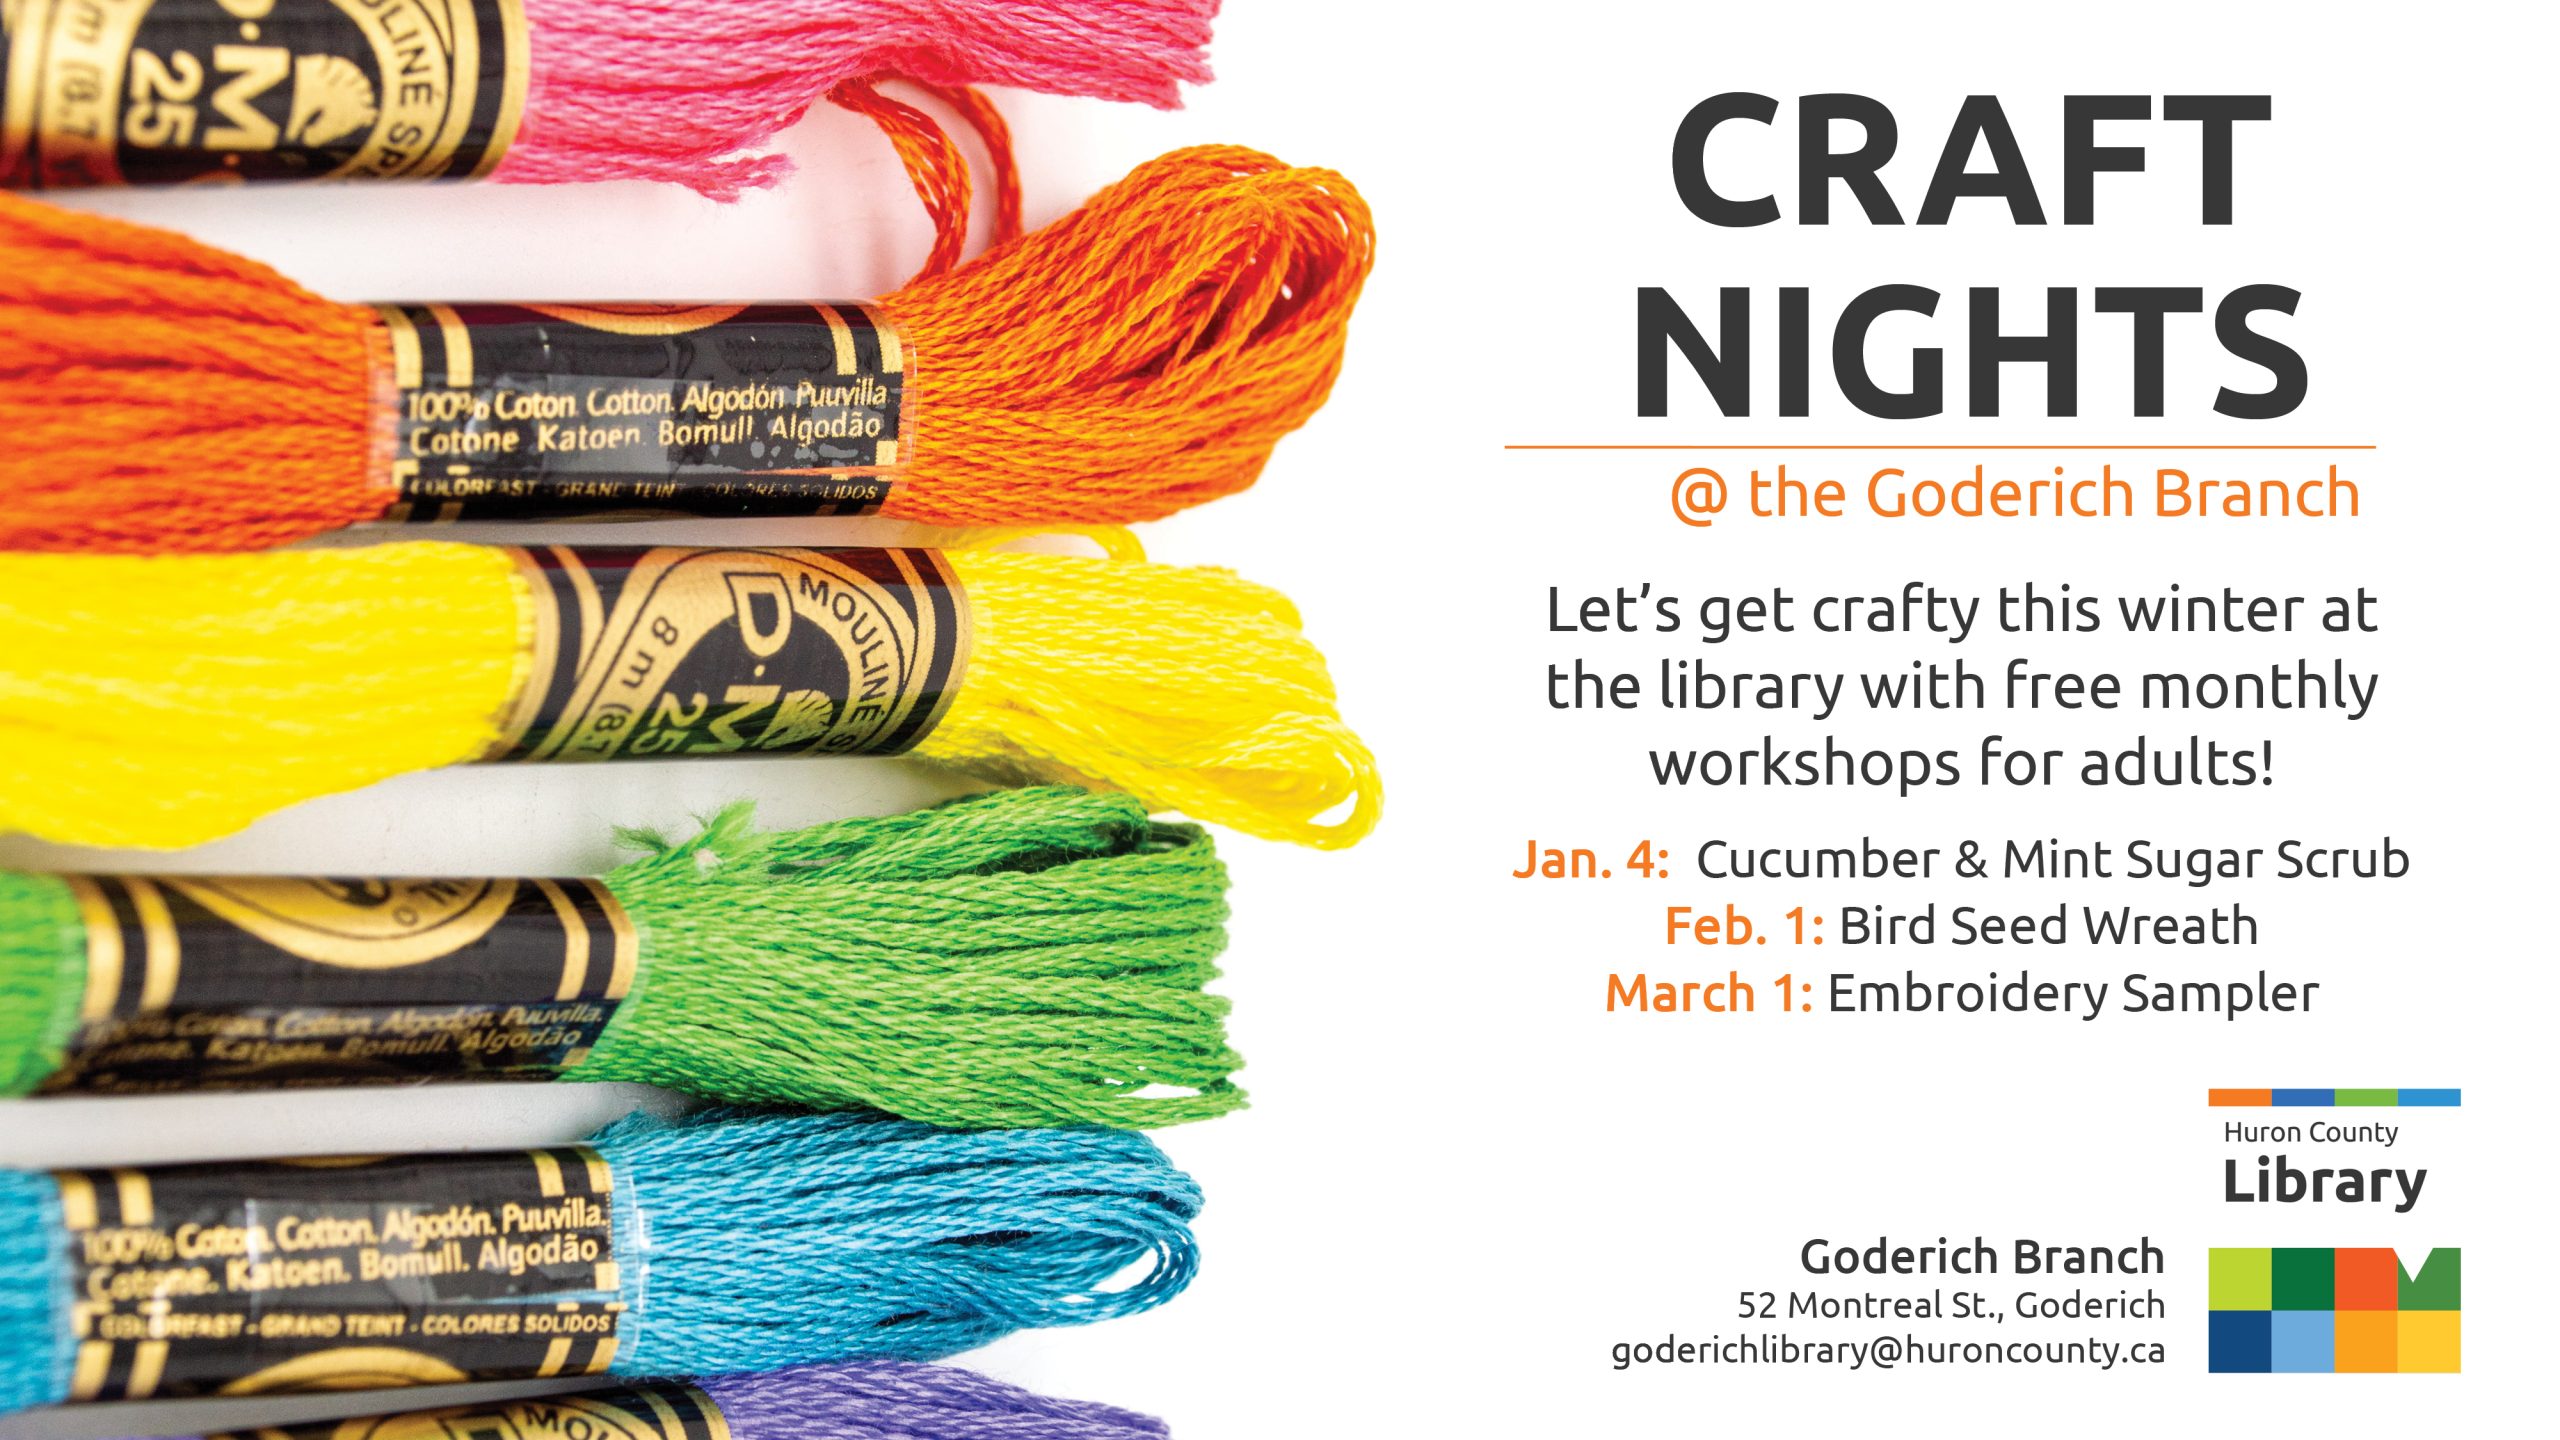 Photo of different colours of embroidery floss with text promoting monthly craft nights for adults at the Goderich Branch